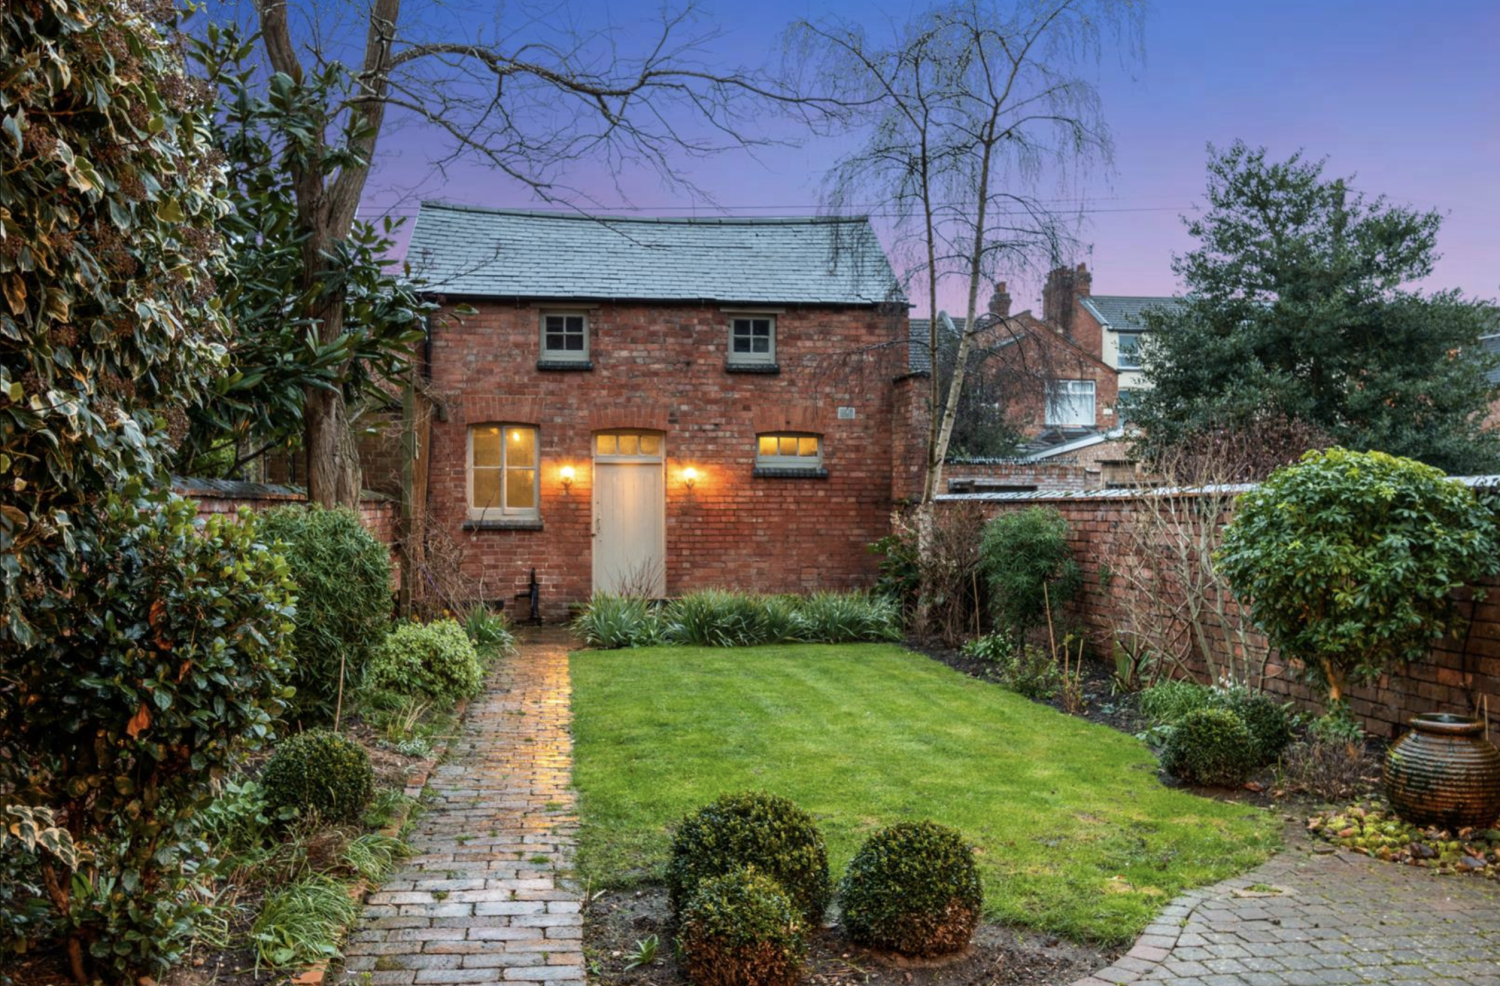 Red brick coach house at the bottom of the garden of a domestic home. Currently being used as a garage but ripe for conversion into a residential annexe